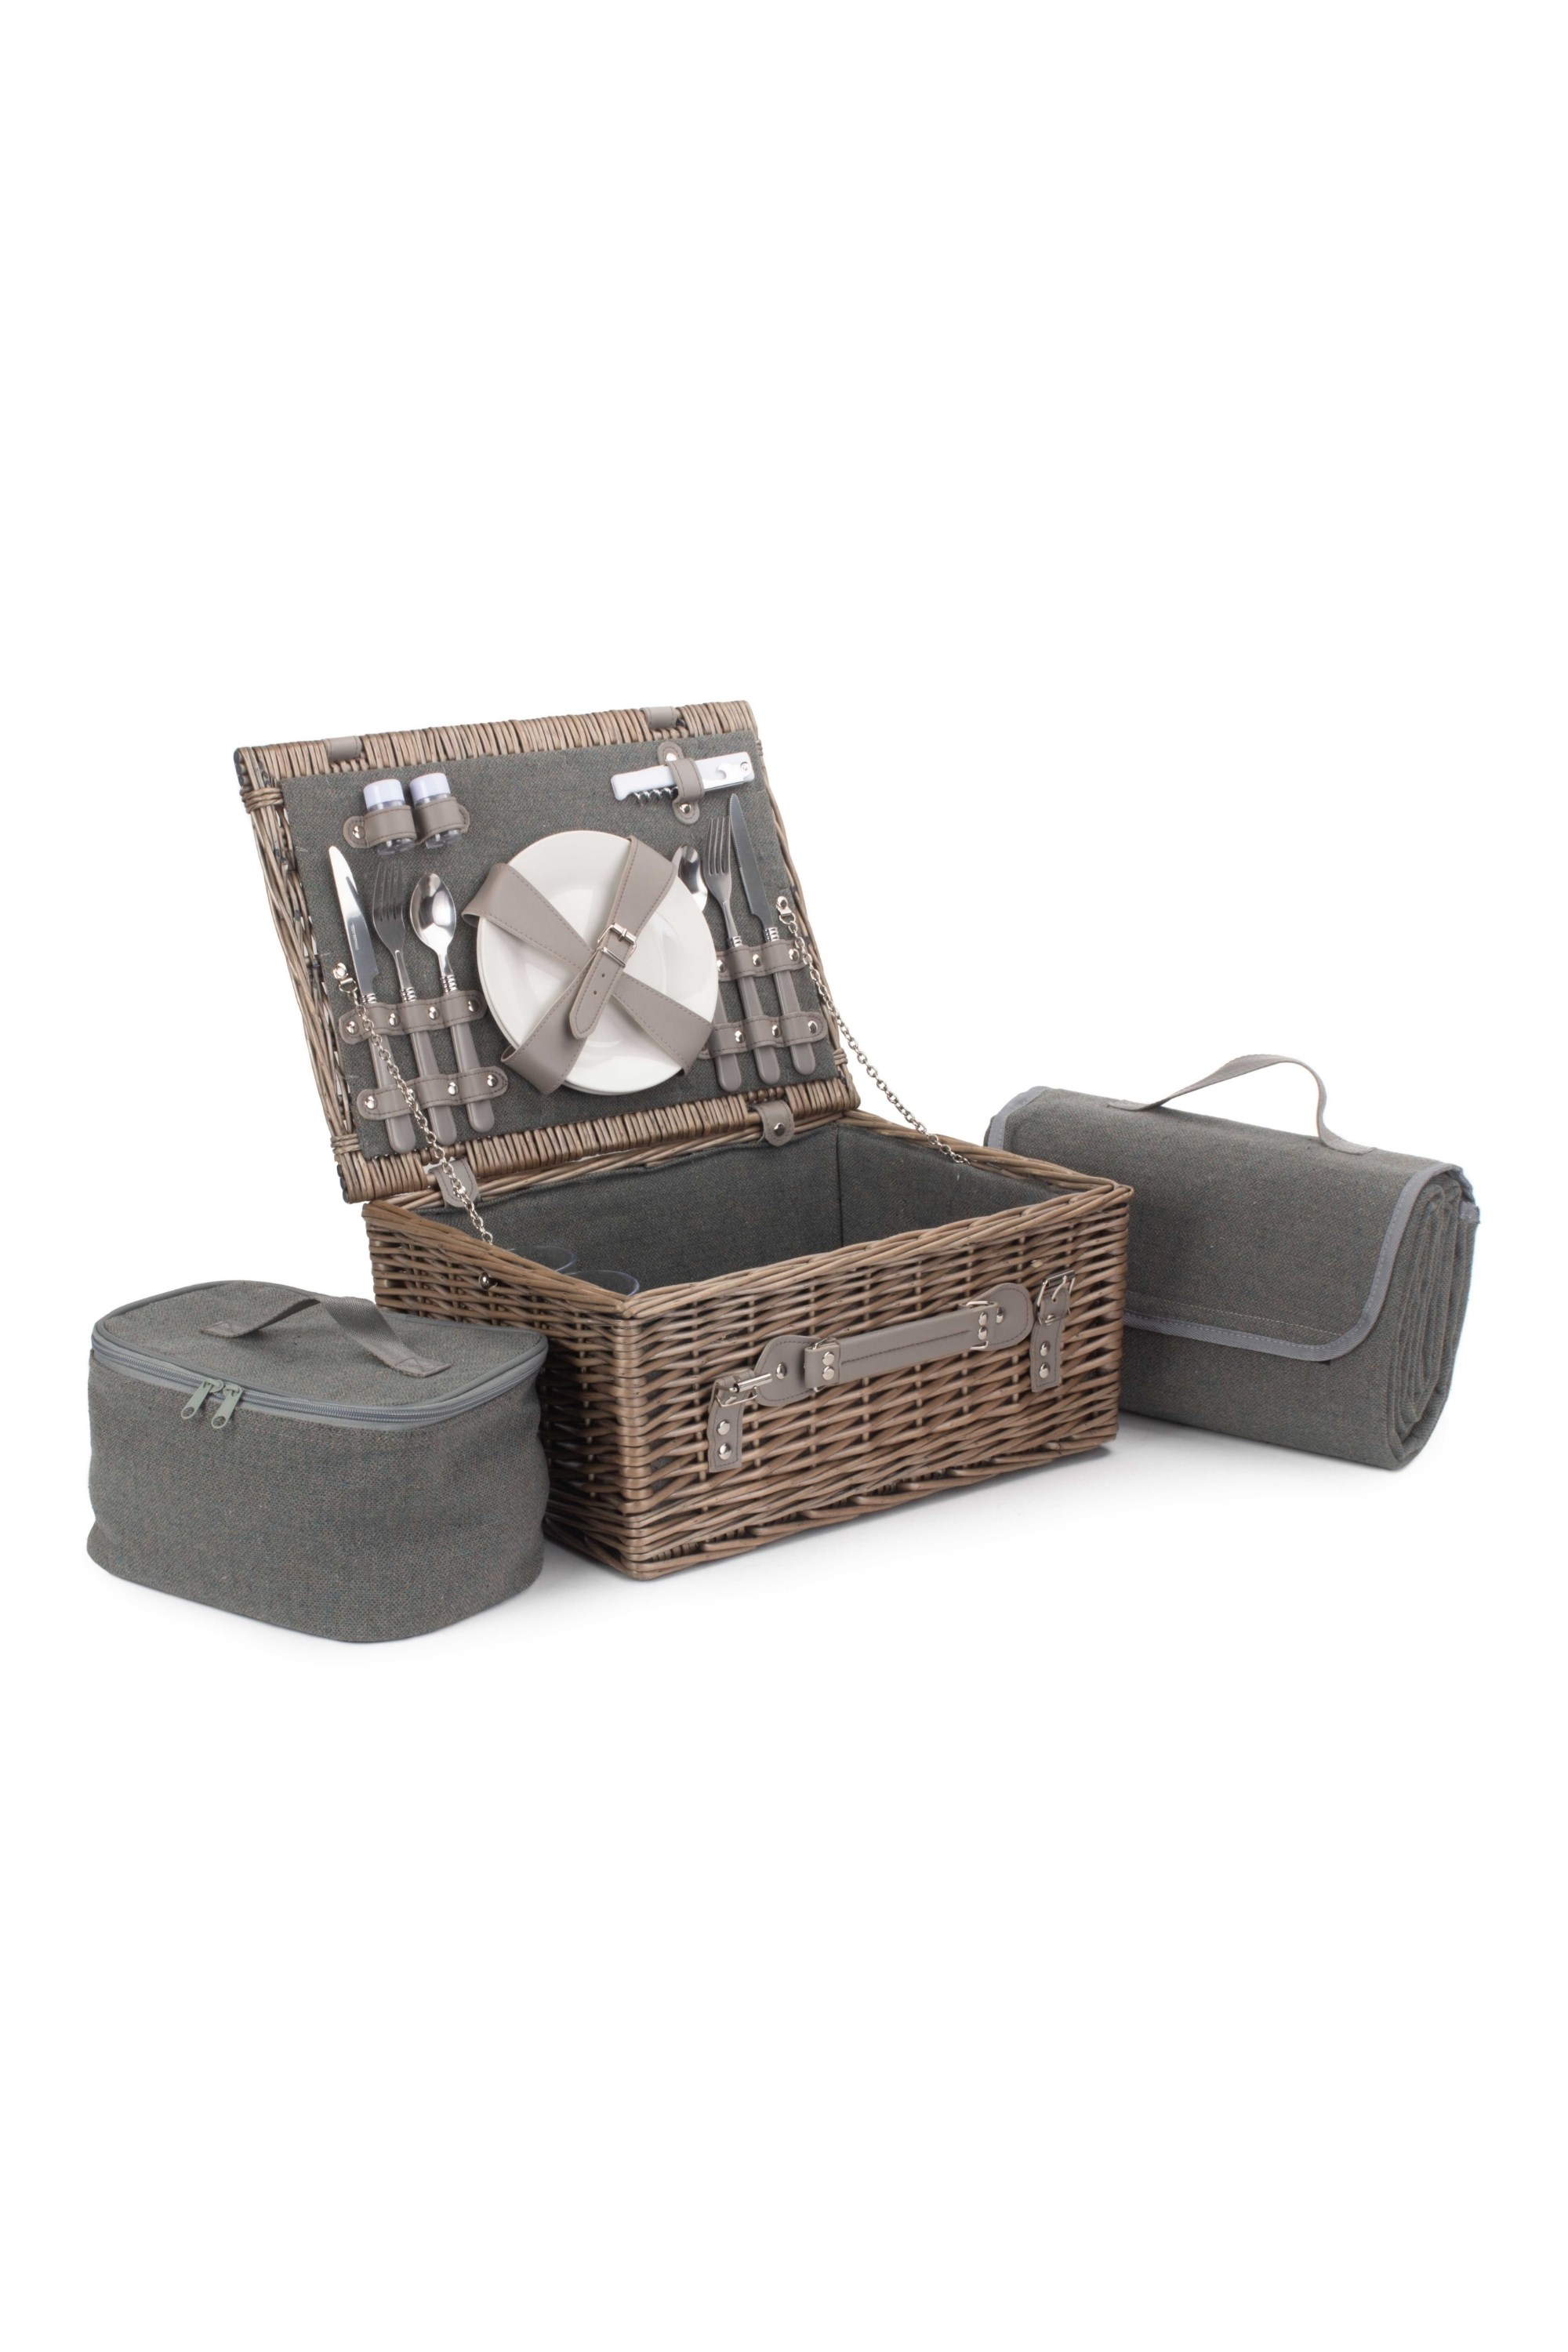 2 Person Grey Tweed Fitted Picnic Basket -